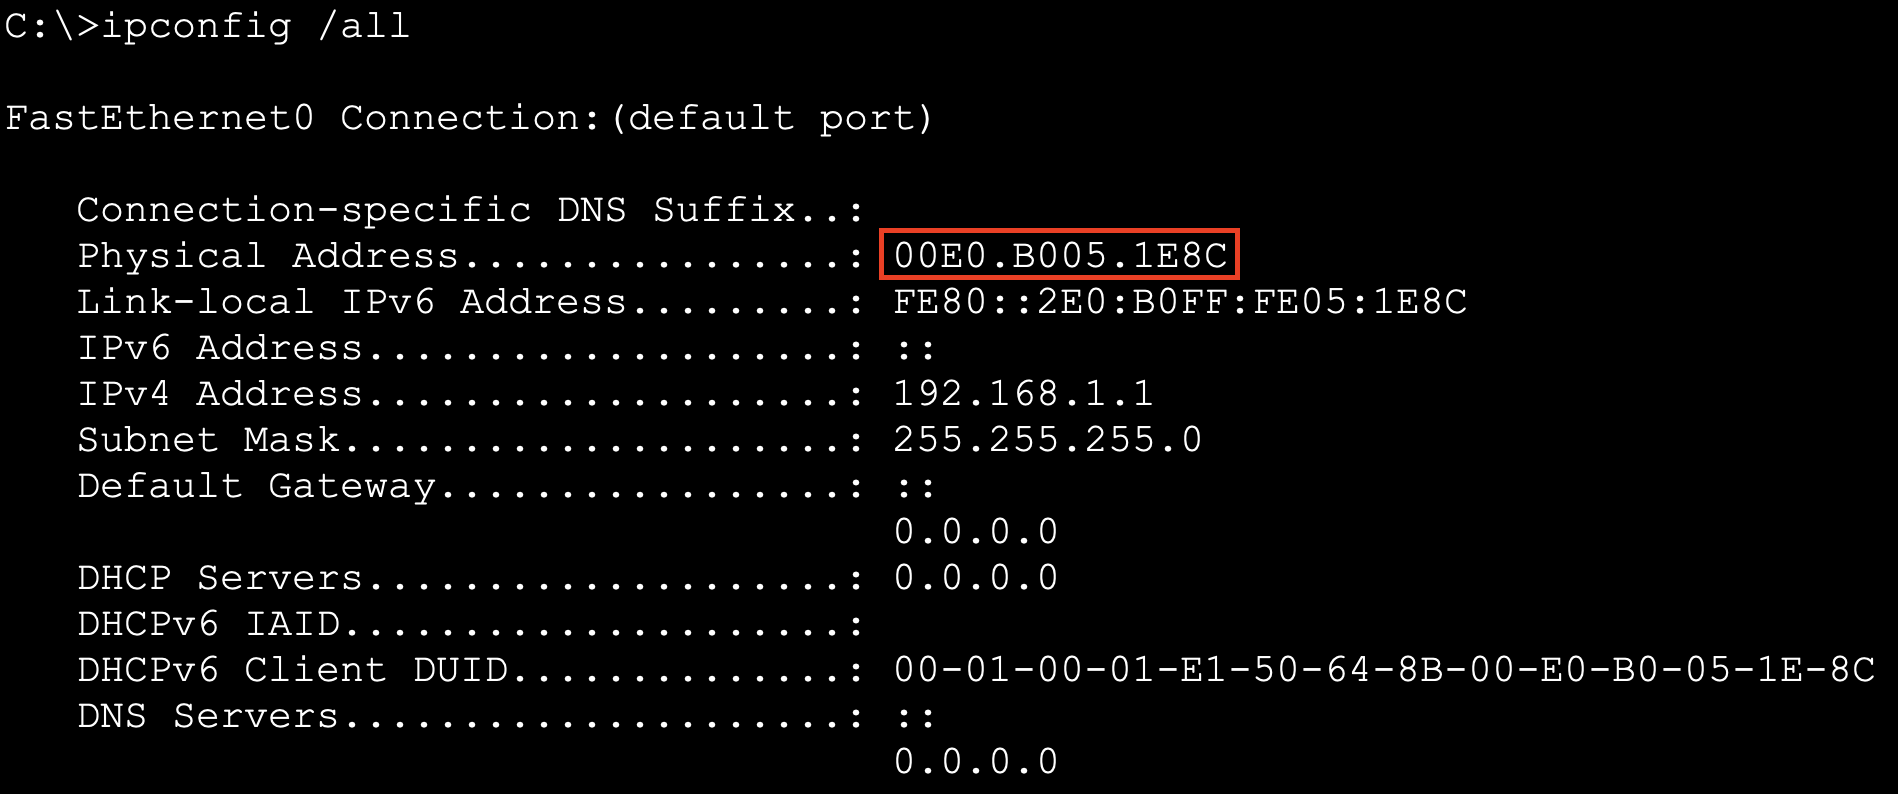 The MAC address (Physical Address) displayed on the command prompt